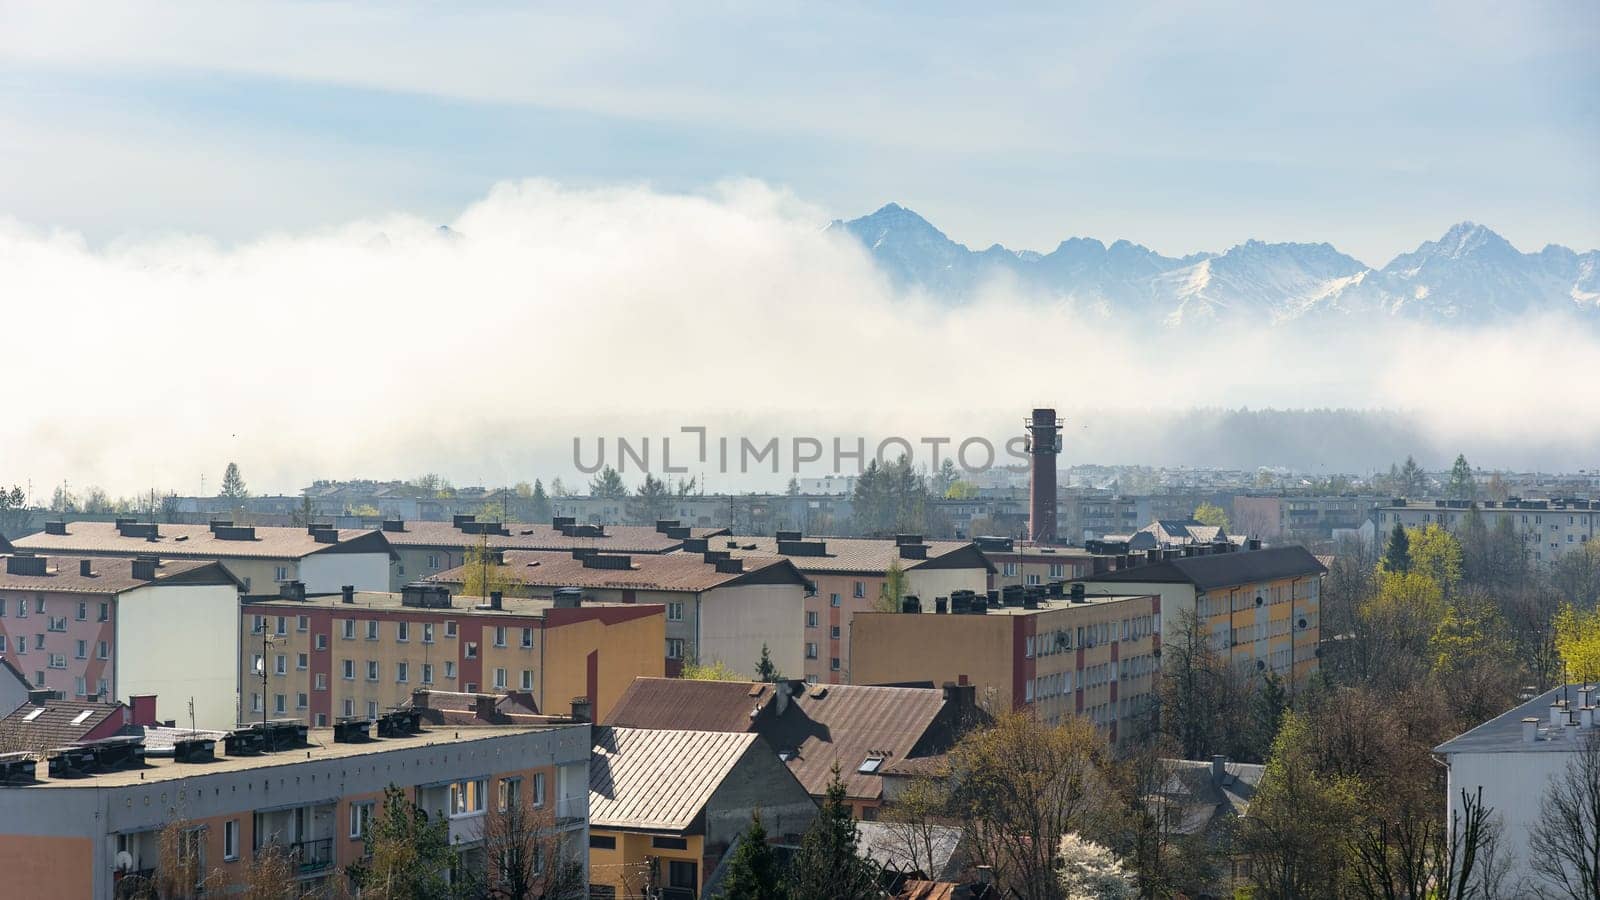 Panoramic view of the rooftops of Nowy Targ with Tatra mountains in the background by mkos83